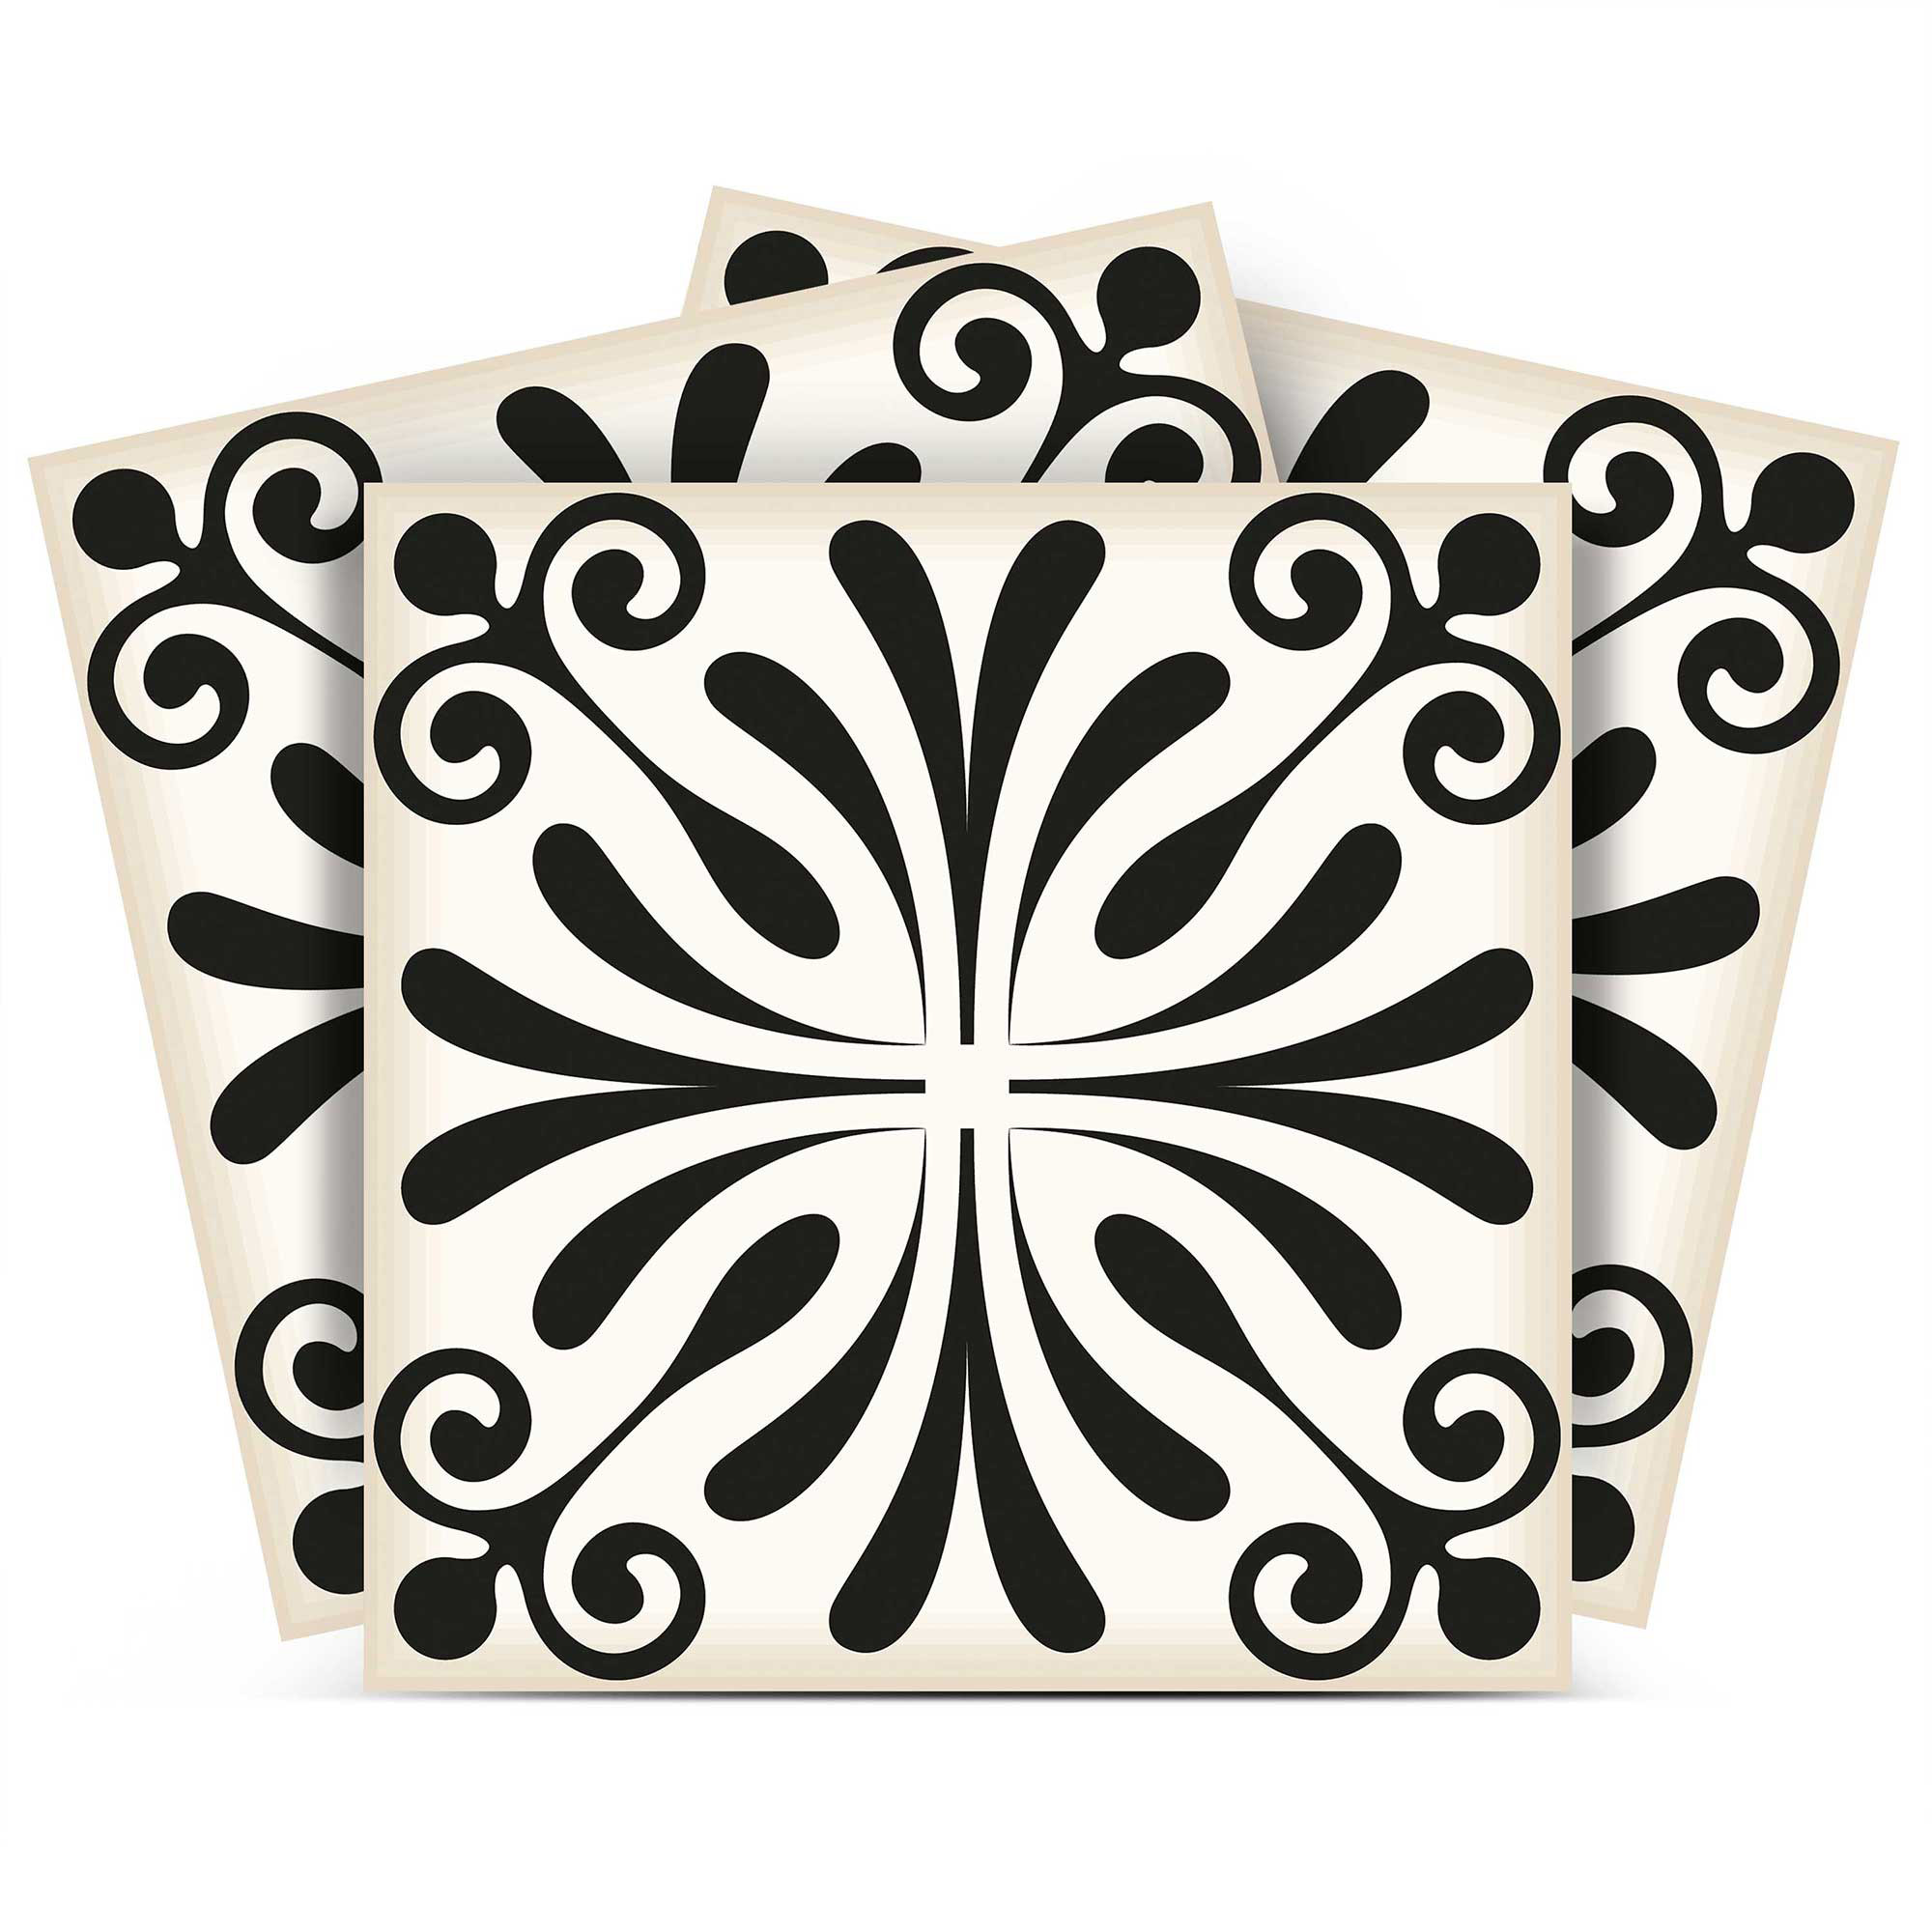 4" X 4" Black and White Flo Peel and Stick Removable Tiles-399950-1